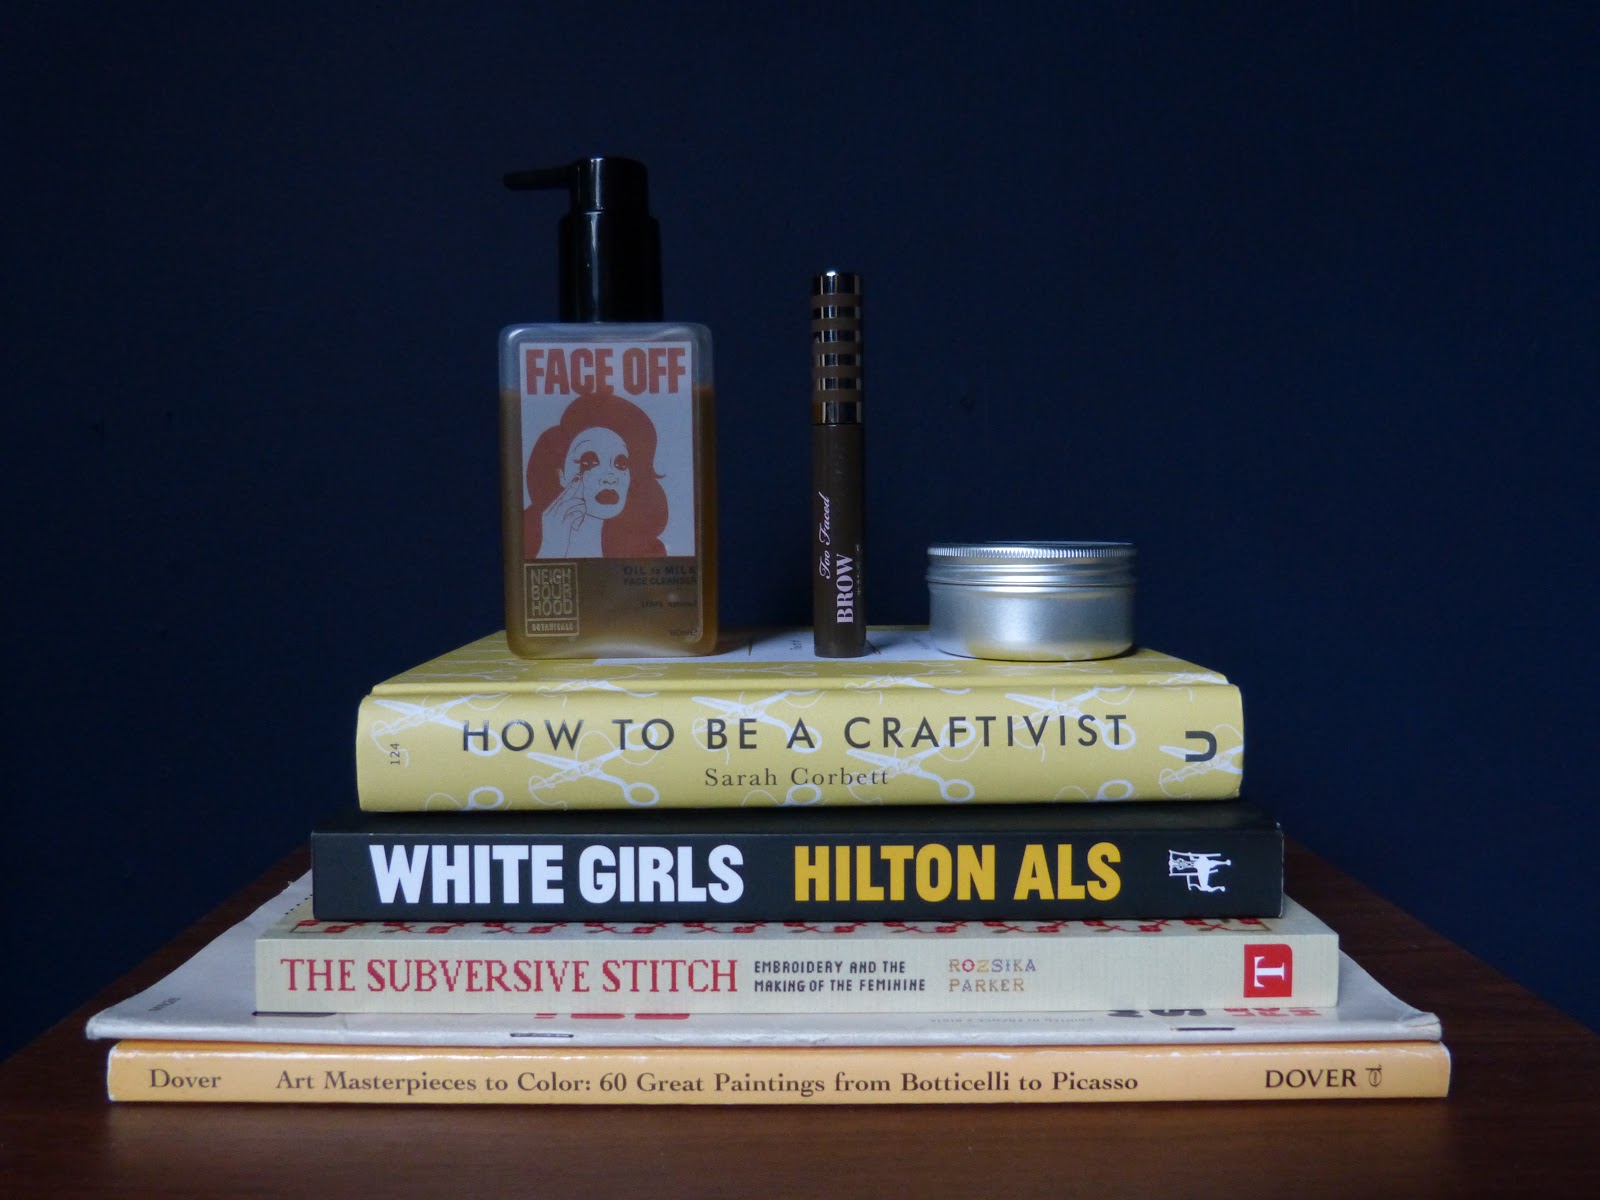 The picture shows a pile of books (from below to top: a colour book, a vintage magazine, The Subversive Stitch by Rozsika Parker, White Girls by Hilton Als and How To Be A Craftivist by Sarah Corbett. On top of the pile of books stands various makeup products. From left to right: Face Off Oil to Milk Cleanser by Neighbourhood Botanicals, Brow-Quickie Brush On Fibre Gel by Too Faced and Ultrabalm by Lush. The background is blue.